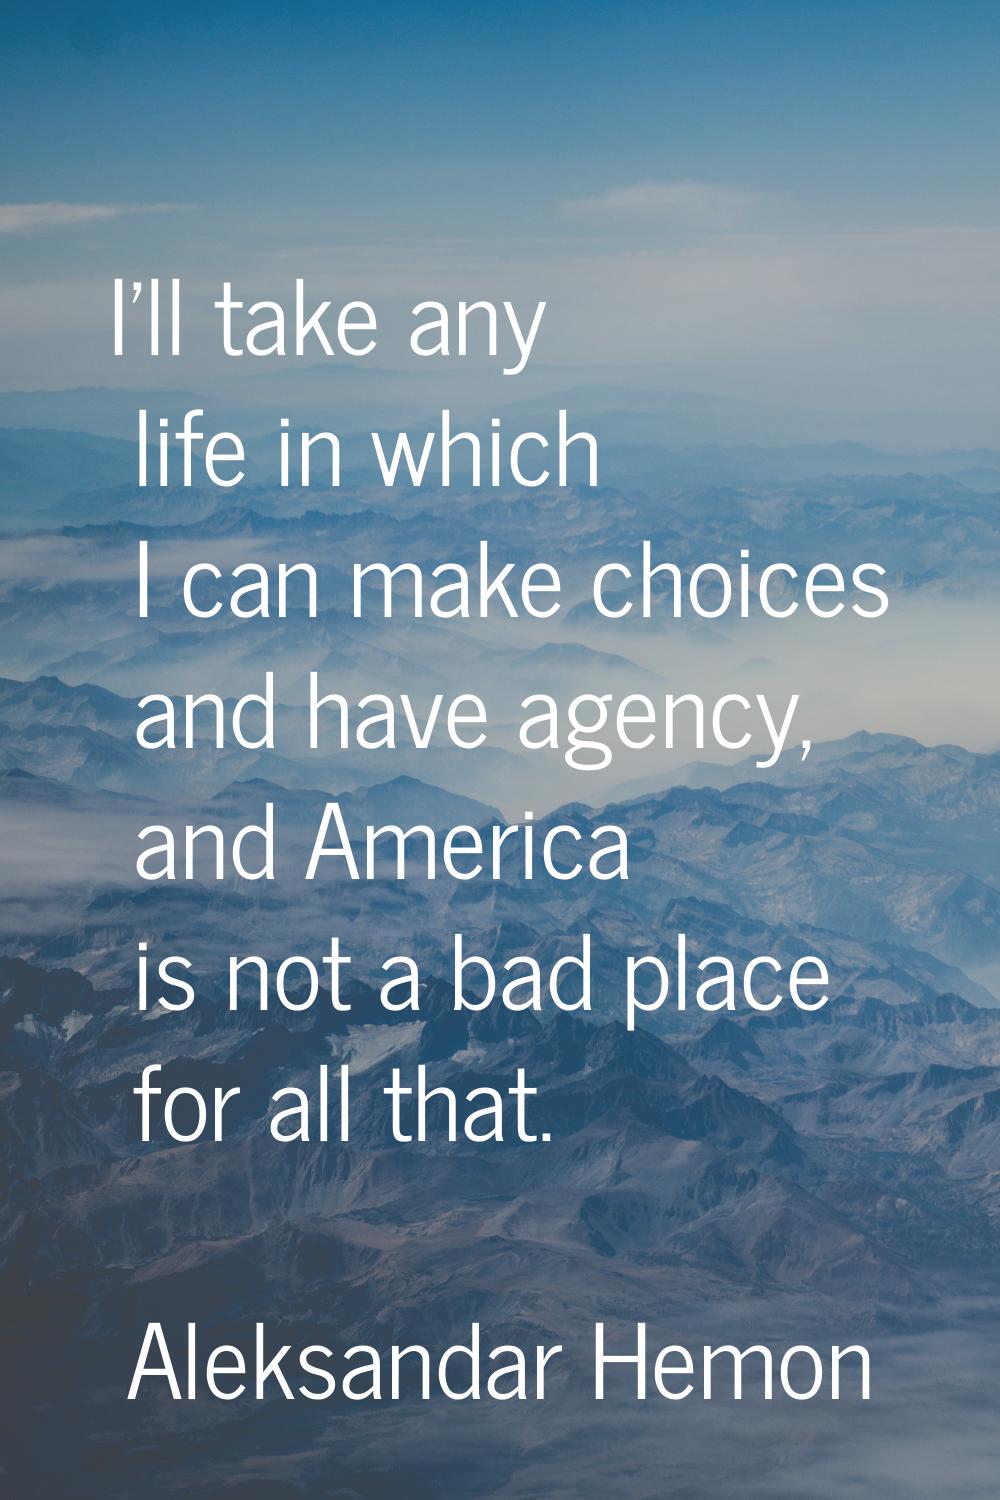 I'll take any life in which I can make choices and have agency, and America is not a bad place for 